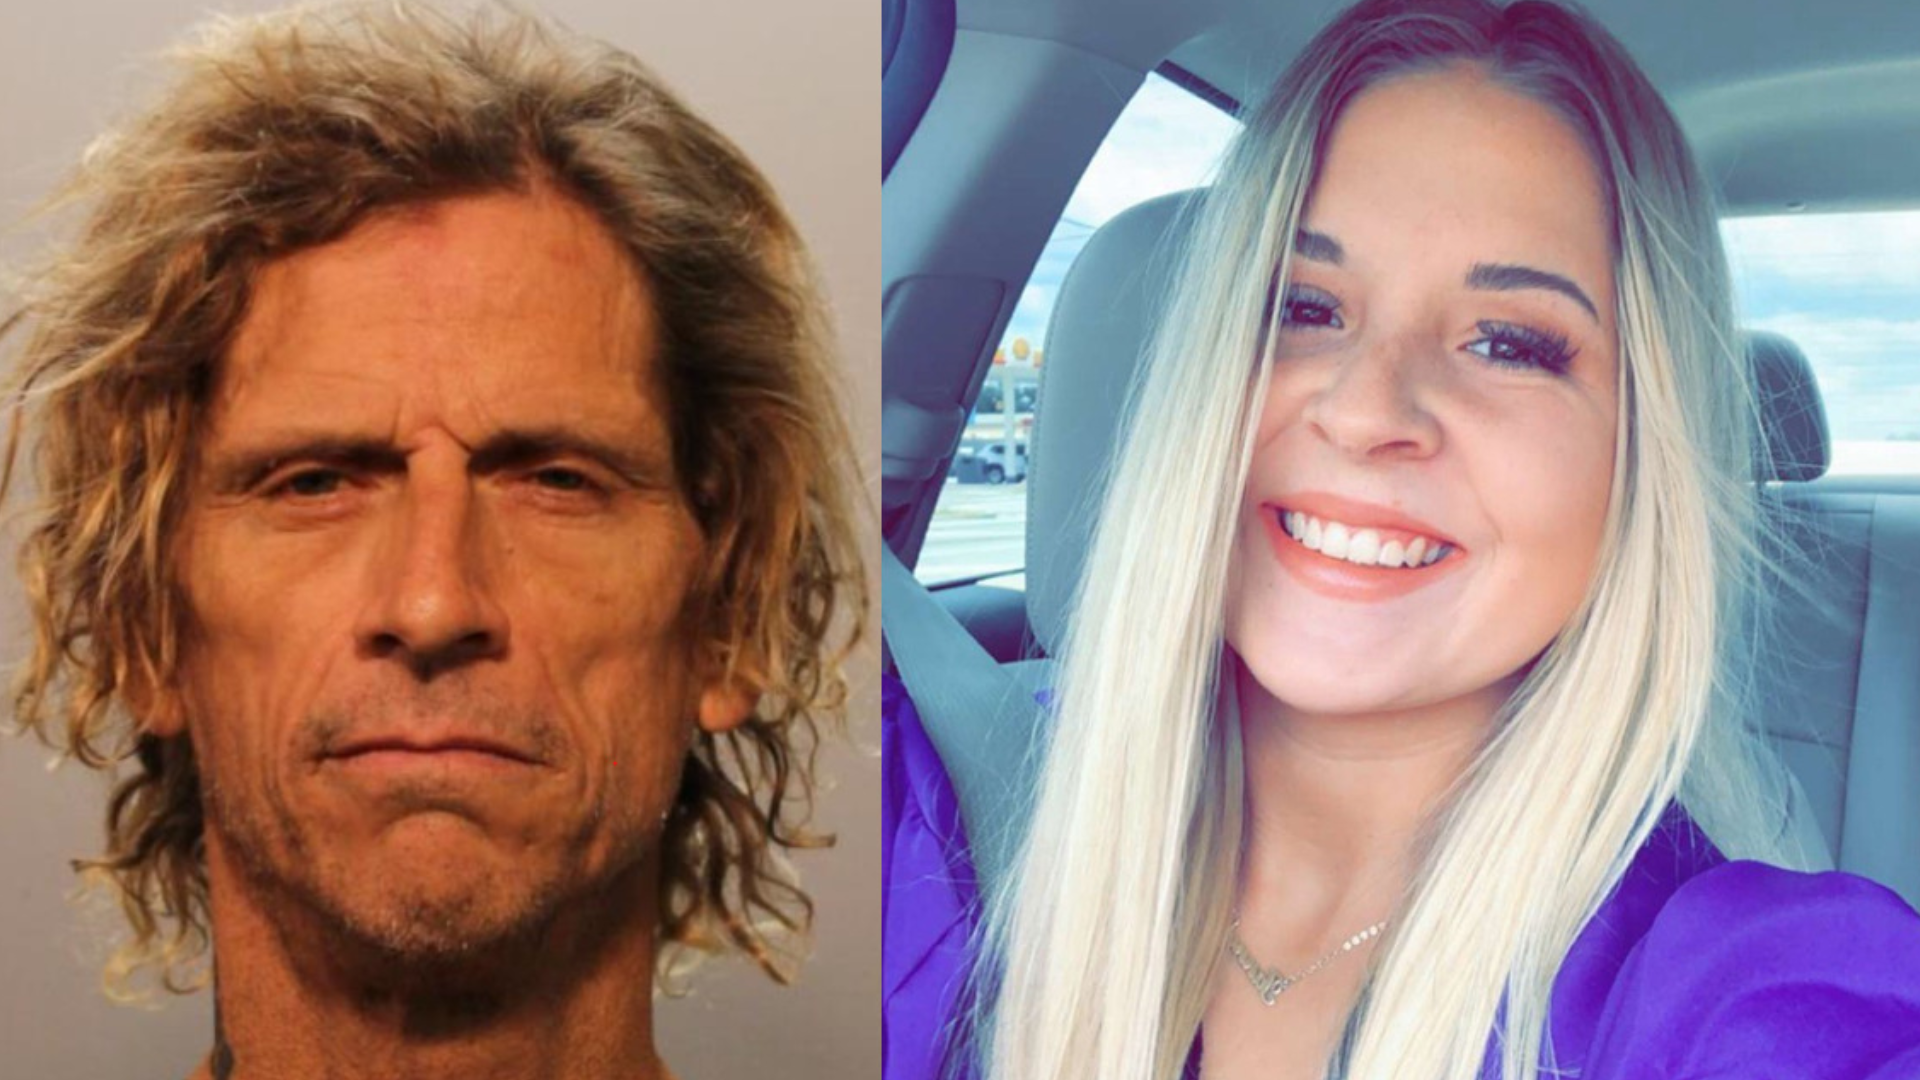 Investigators say Michael Troy Hutto was arrested for manslaughter in connection with a homicide Thursday at the Hilton hotel in Singer Island.